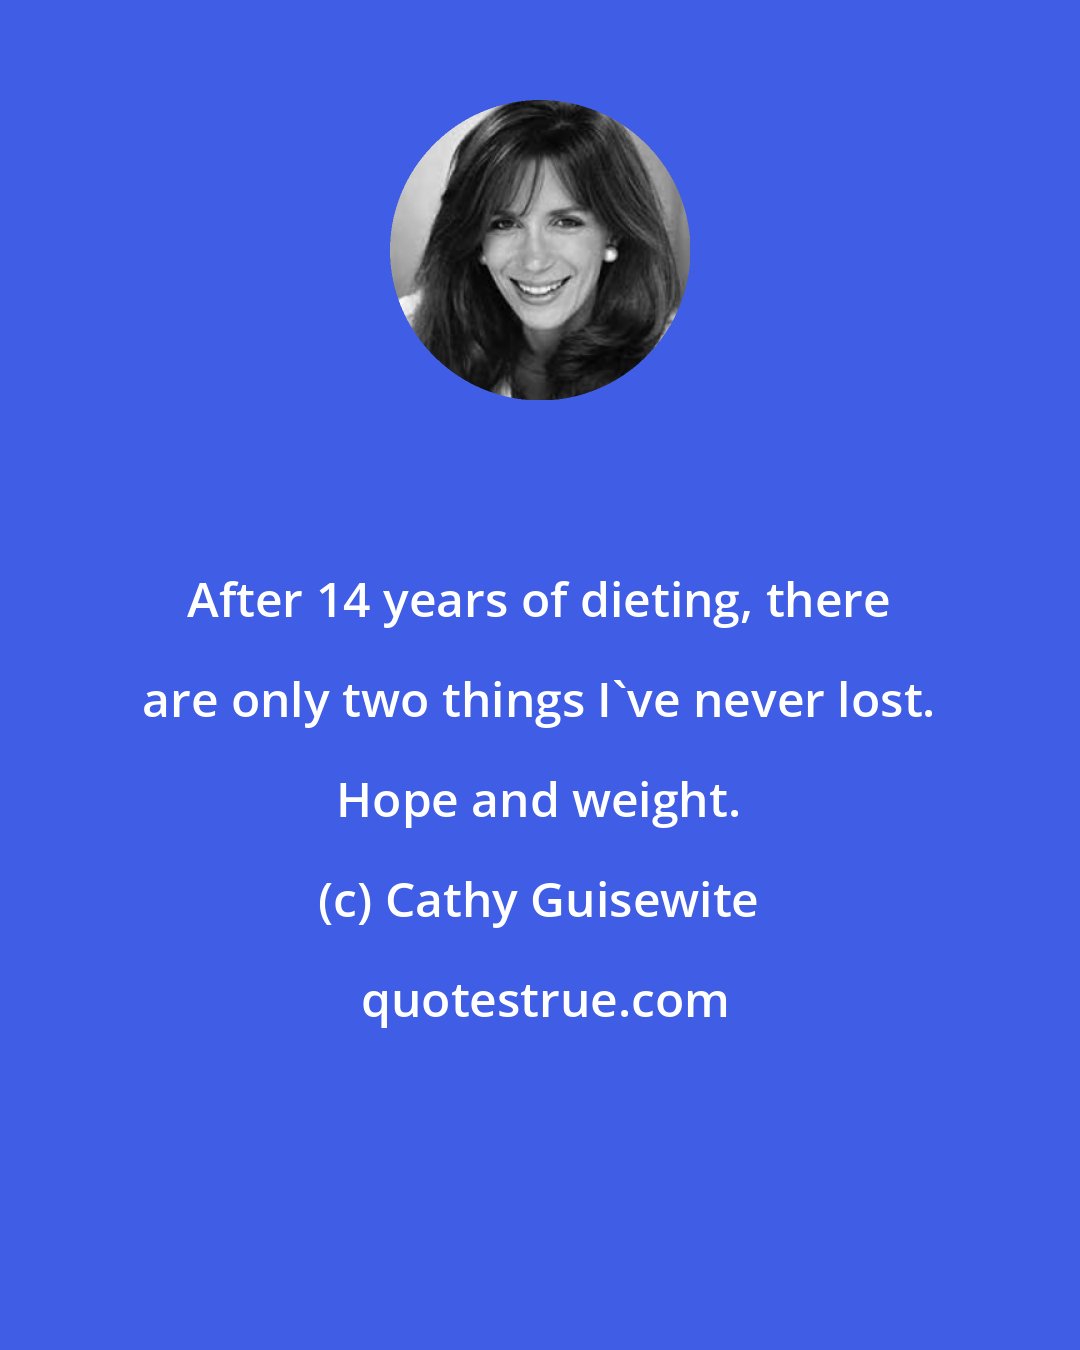 Cathy Guisewite: After 14 years of dieting, there are only two things I've never lost. Hope and weight.